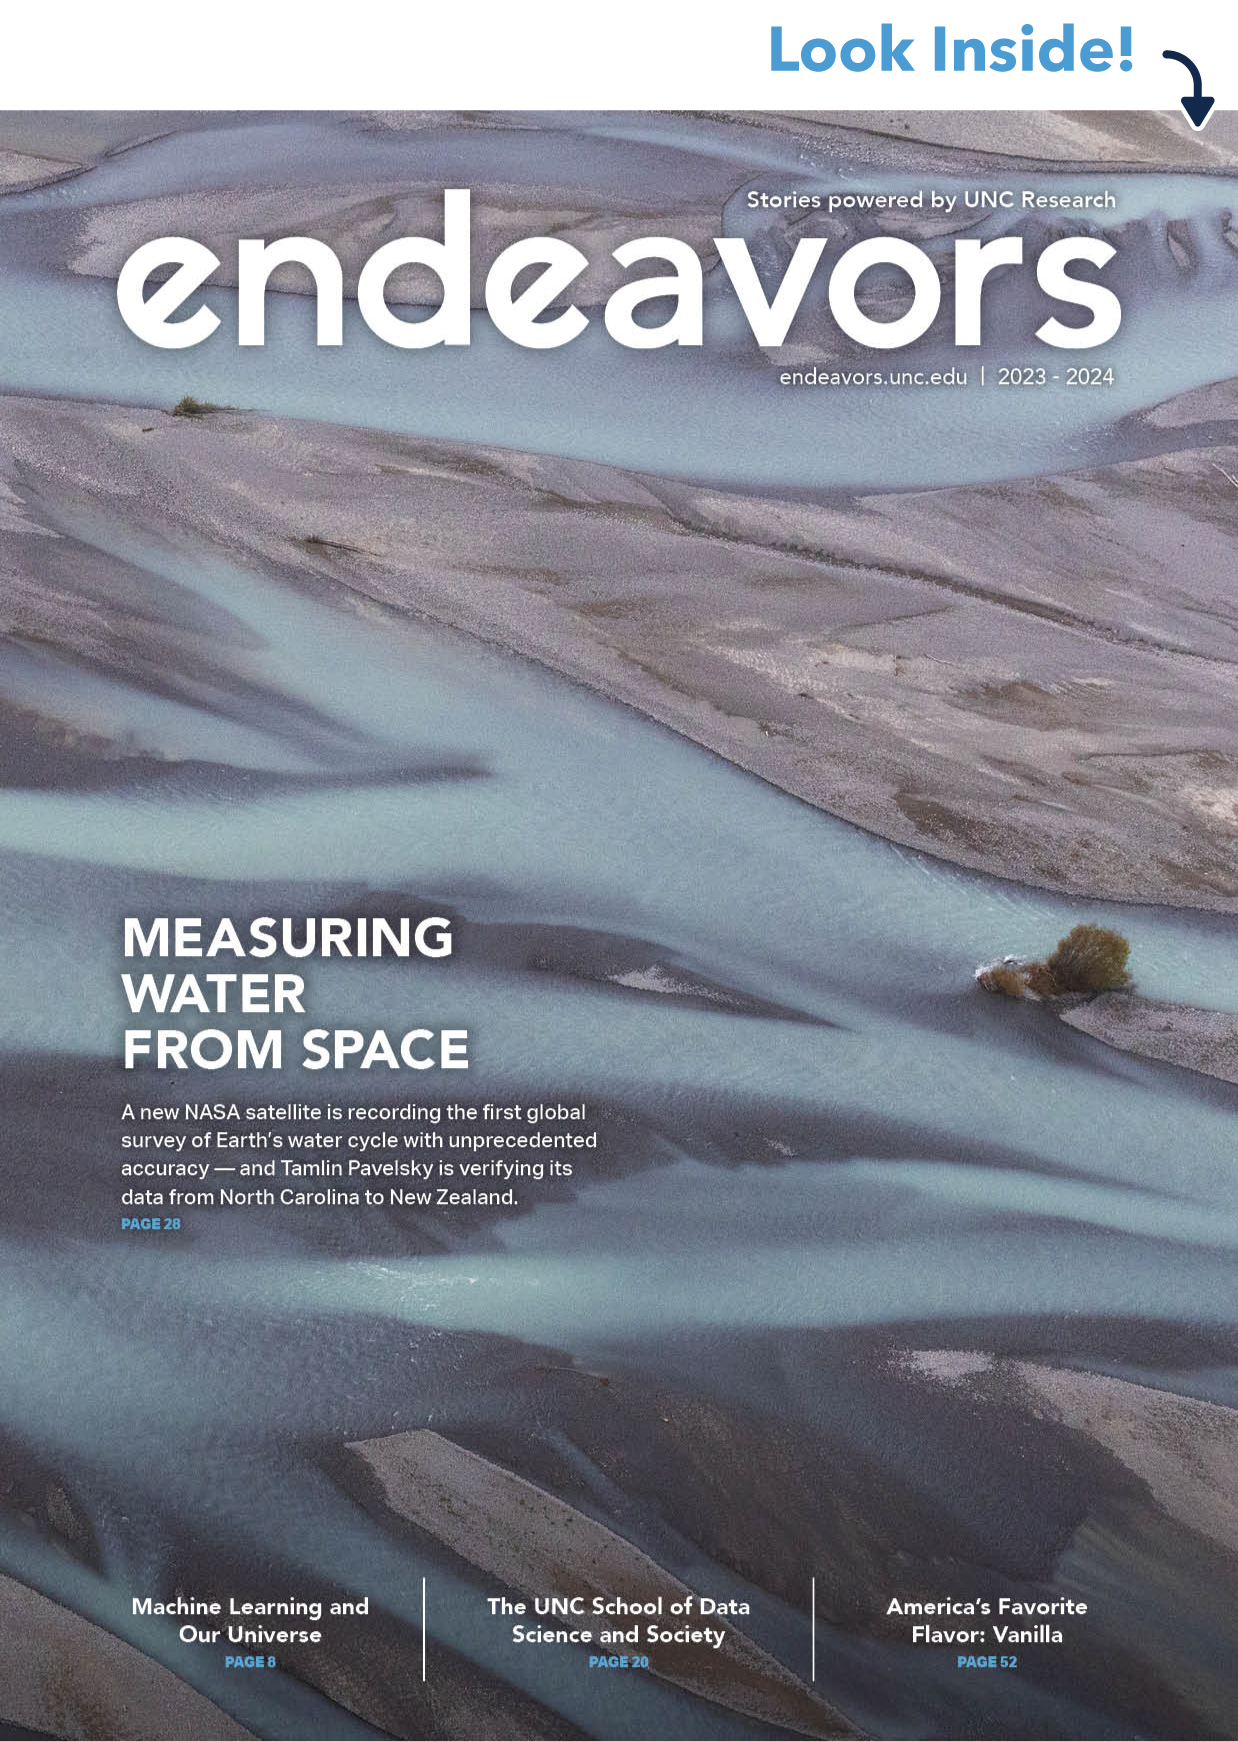 Cover of the 2023-2024 Endeavors magazine. Click to view a flipbook version of the print magazine.